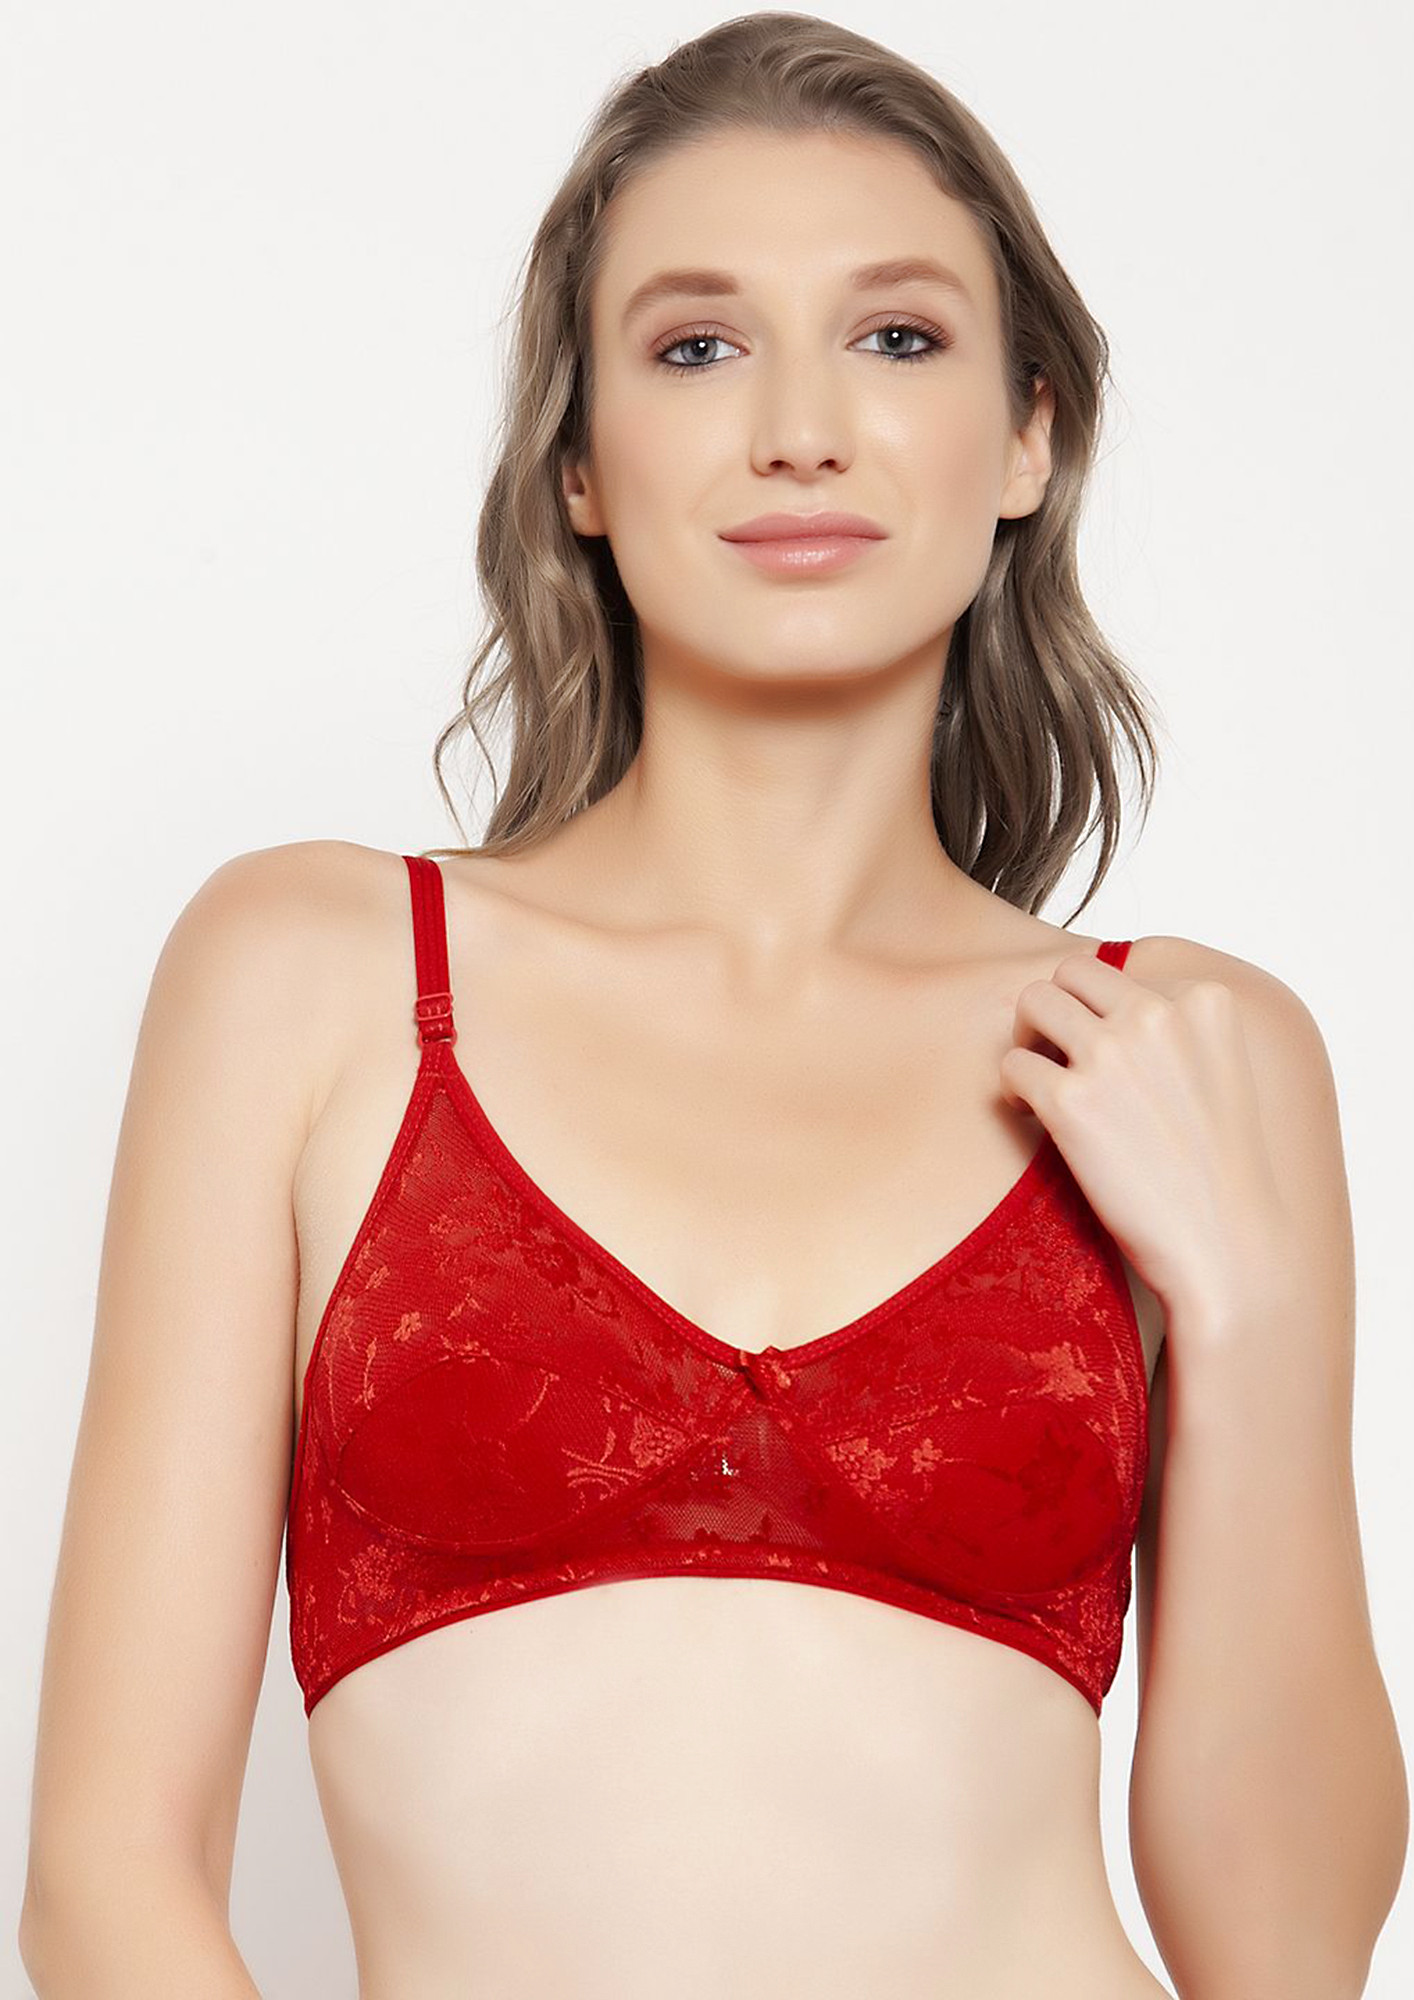 Buy Women's Solid Non-Padded Non-Wired Bra with Adjustable Straps Online